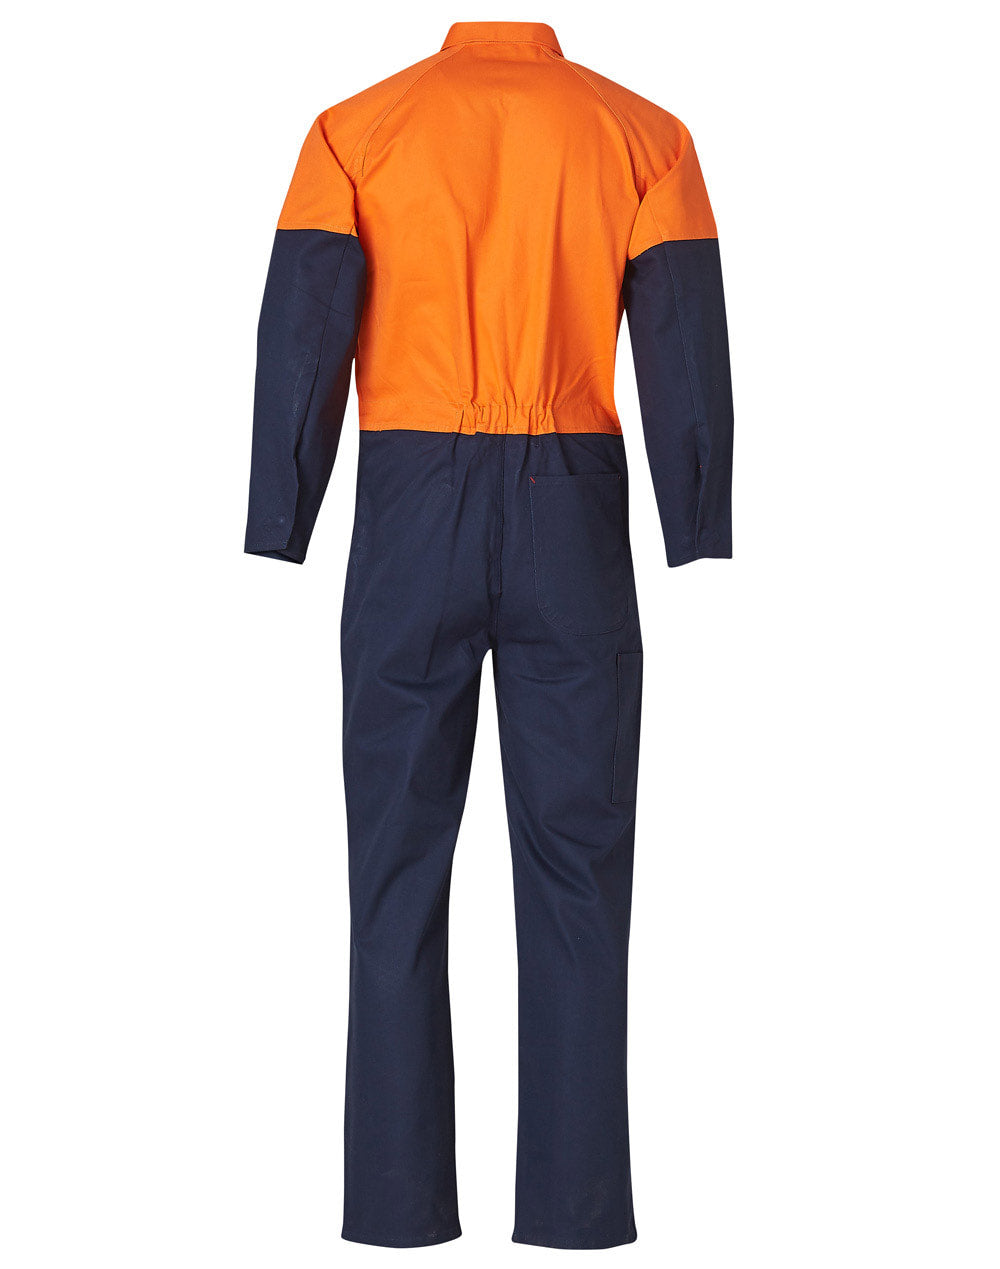 AIW SW204 MEN'S TWO TONE COVERALL Regular Size